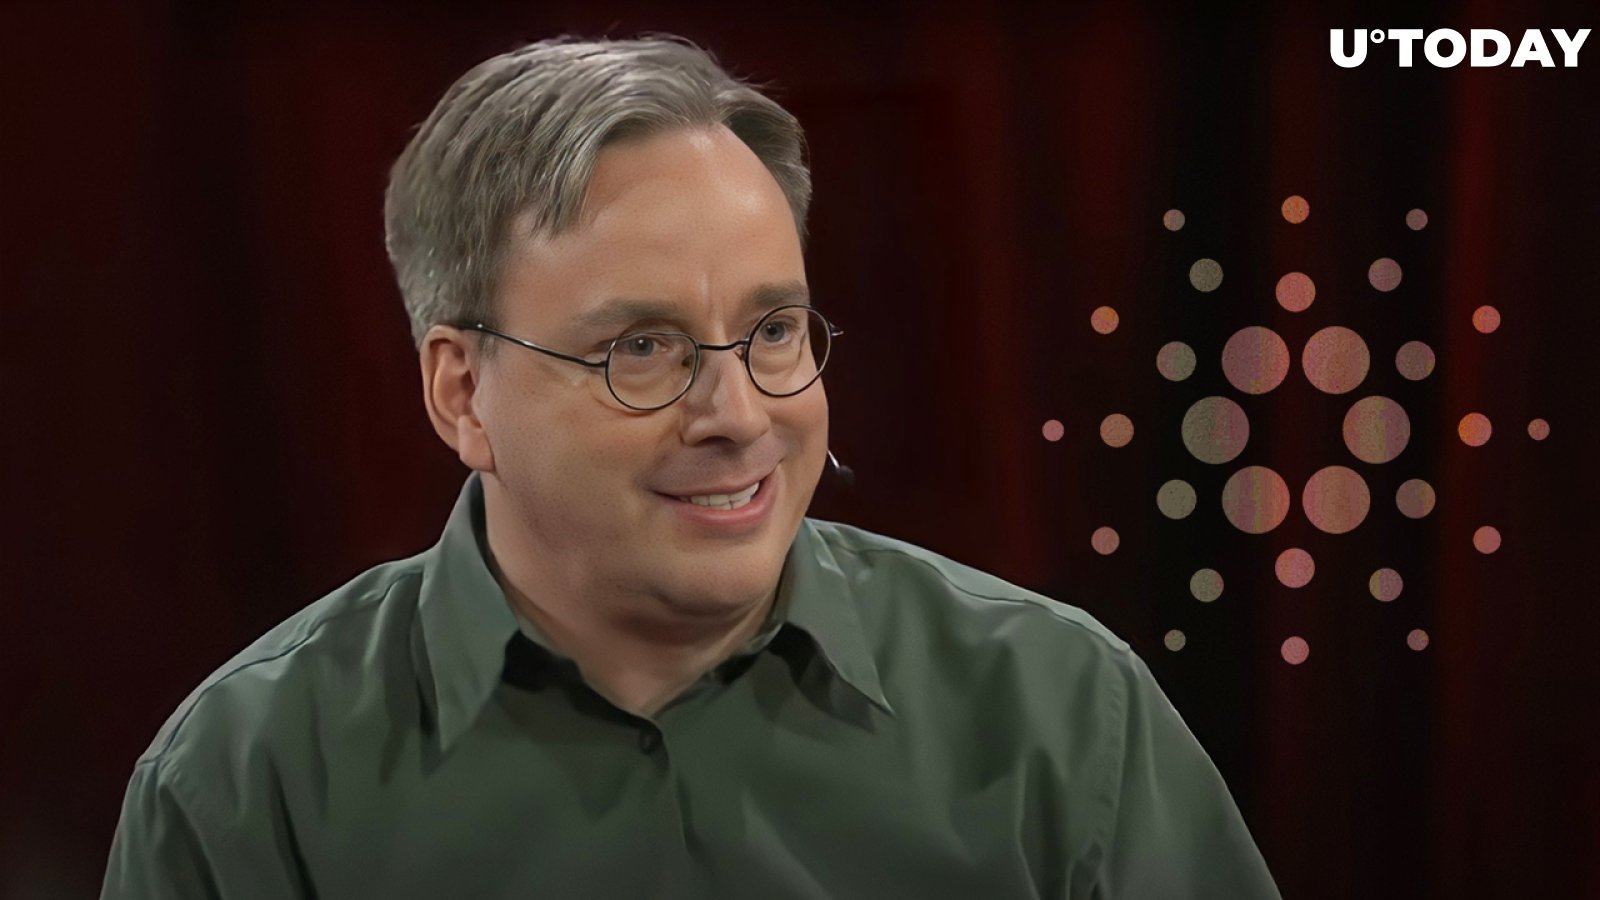 Cardano and Linux Creator Linus Torvalds Meet in Fireside Chat